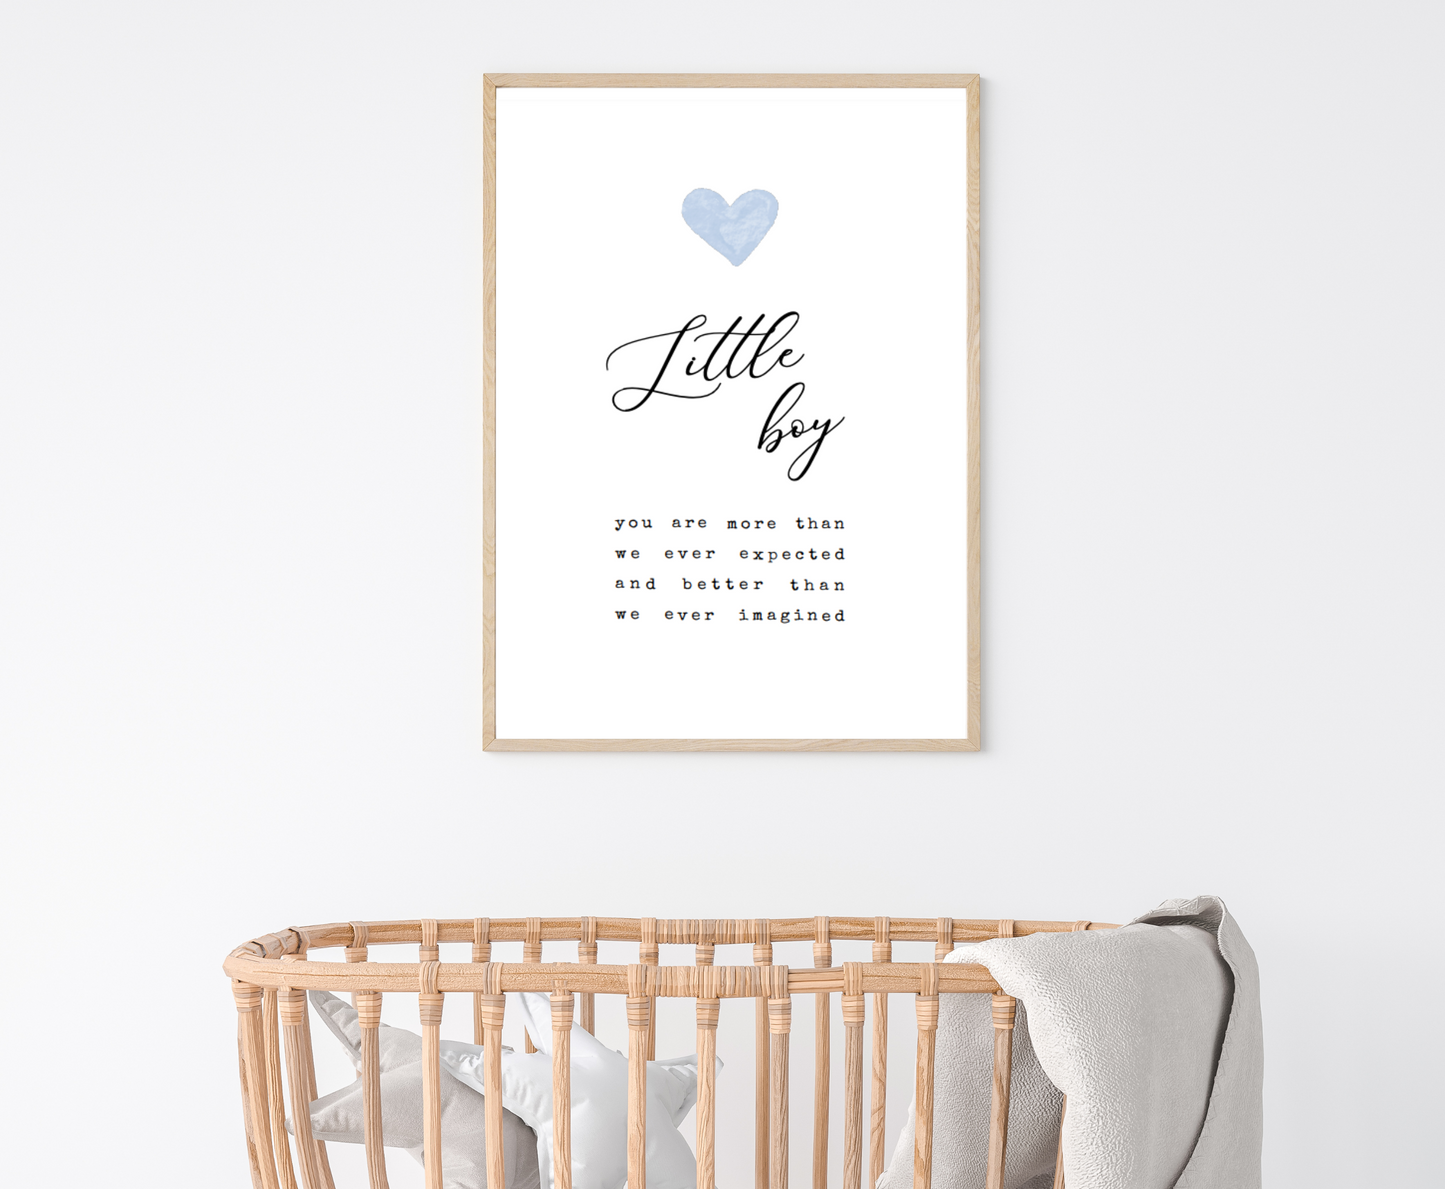 A digital print is hung above a baby’s cradle. The digital print has a blue heart at the top and a piece of writing that says: “Little boy, you are more than we ever expected and better than we ever imagined.”